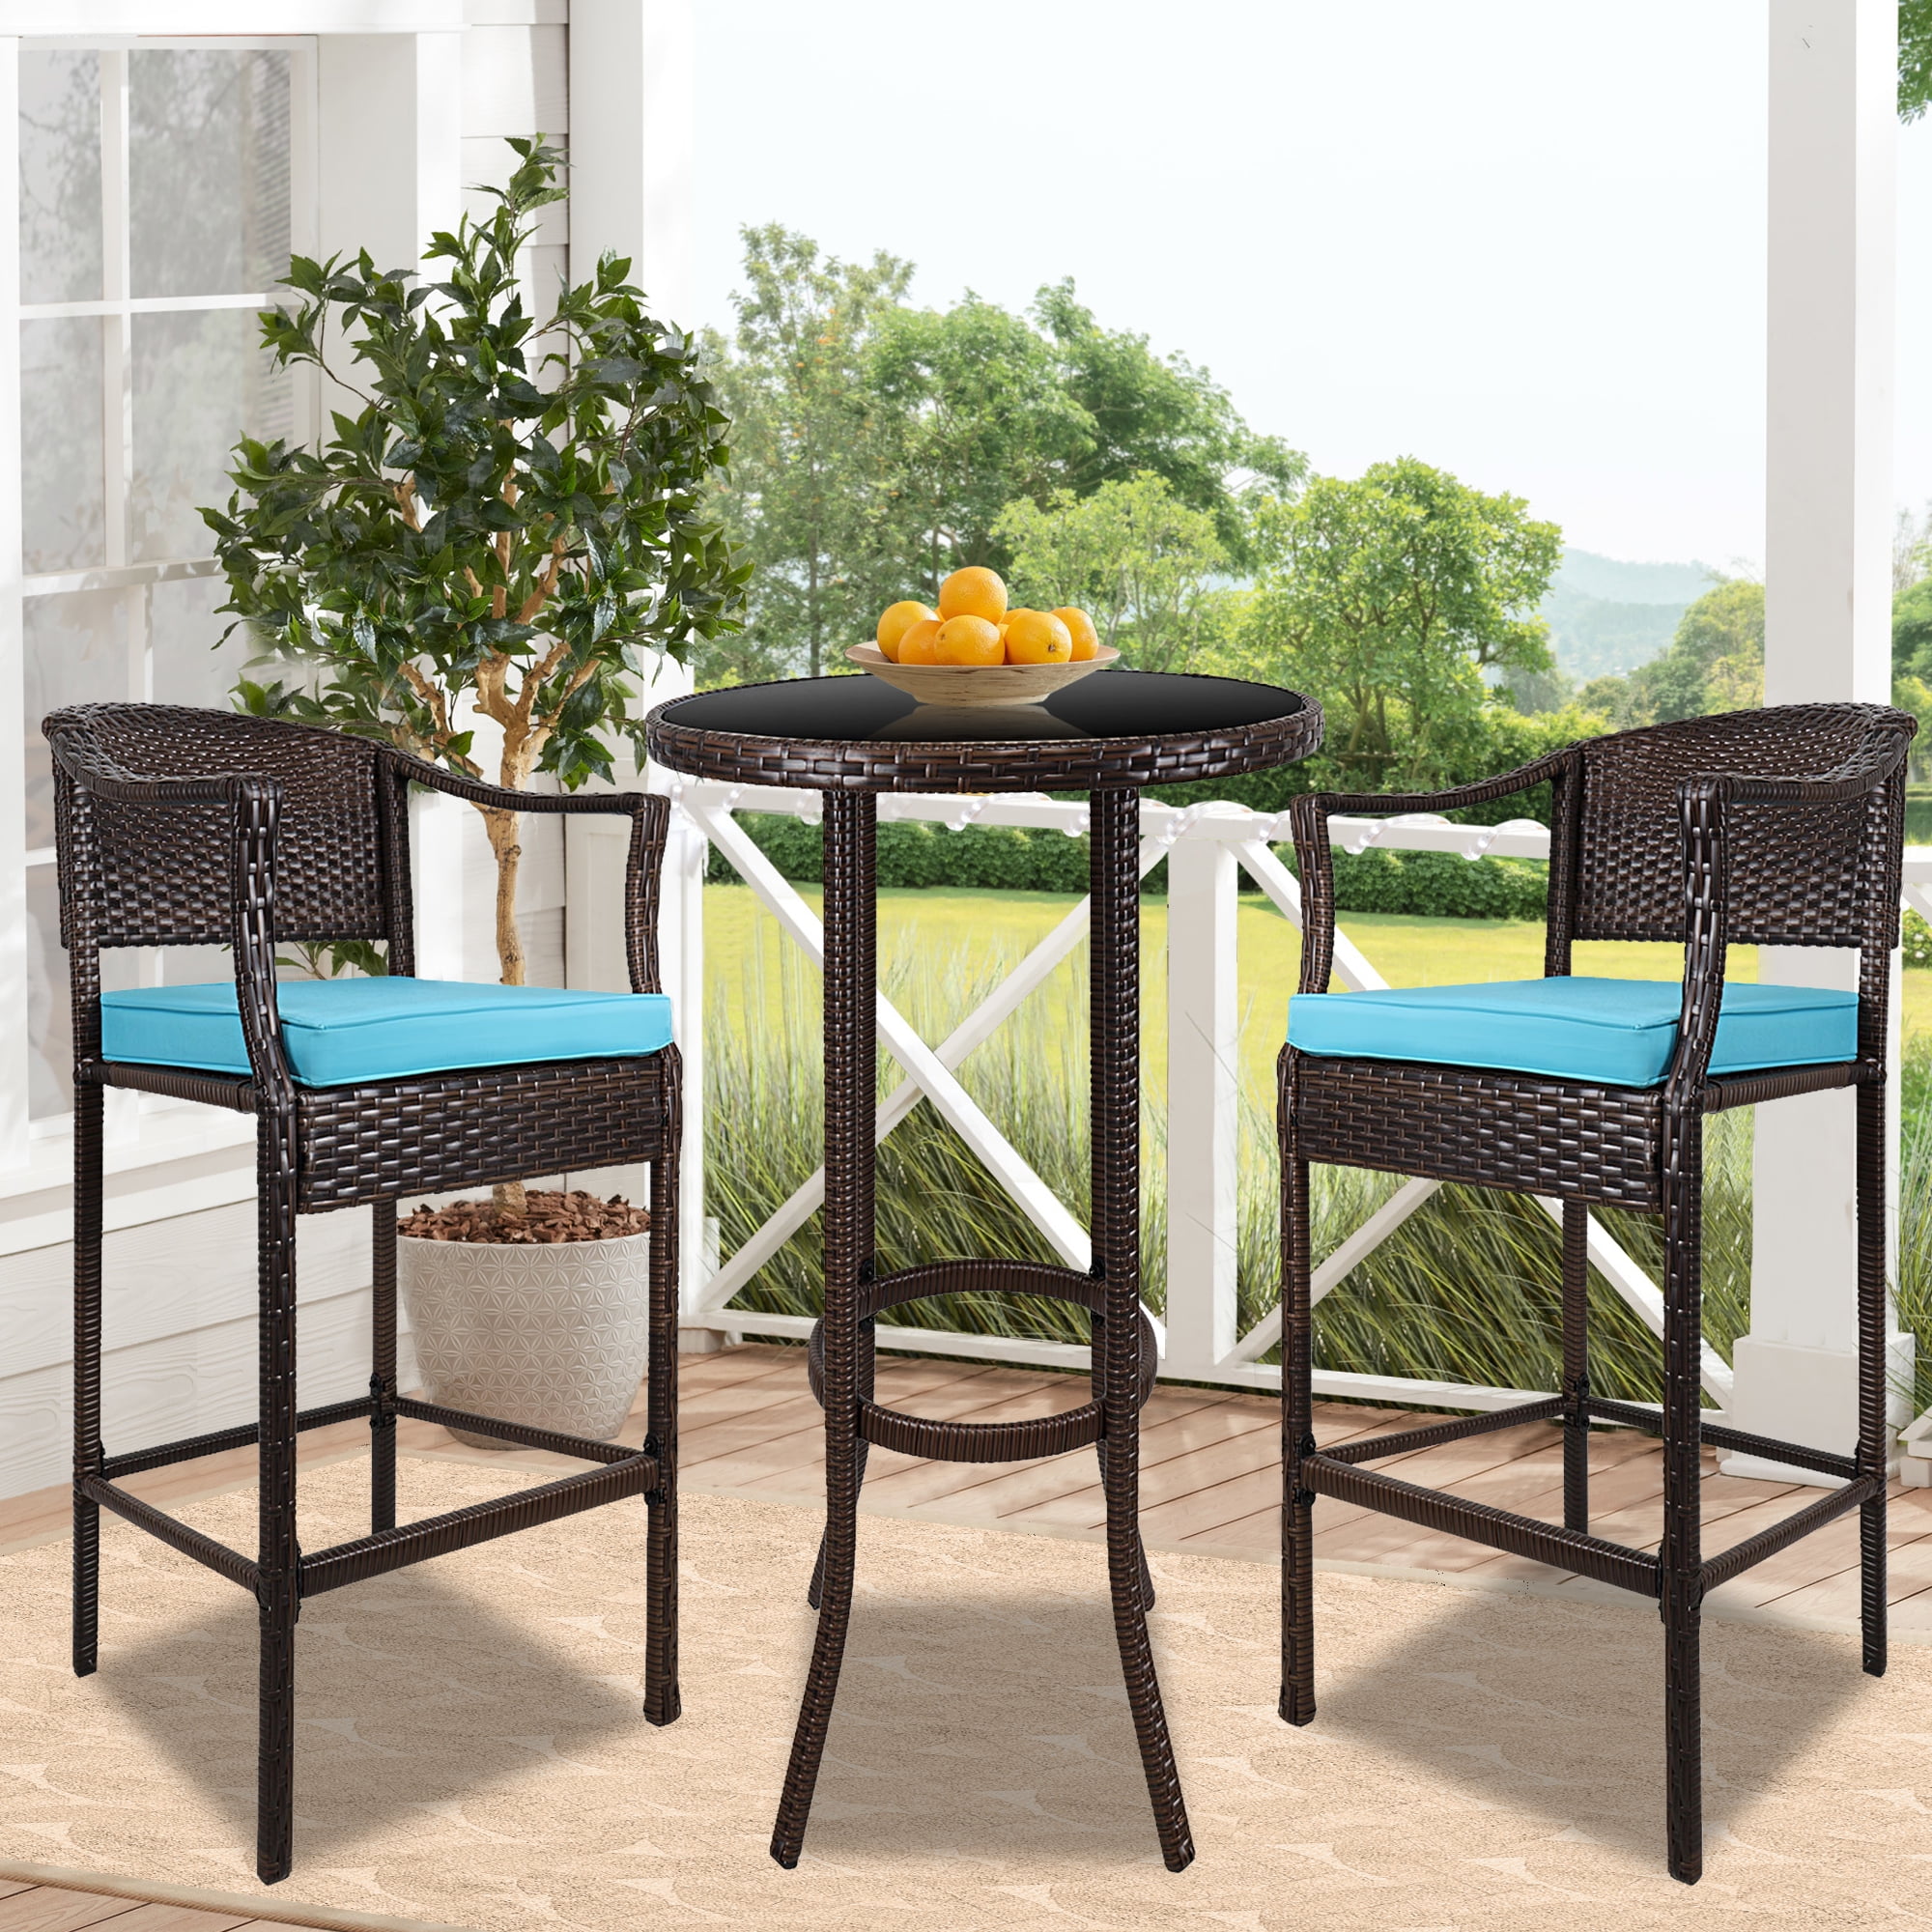 Clearance Bistro Table And Chairs 3, Outdoor Counter Height Bistro Table